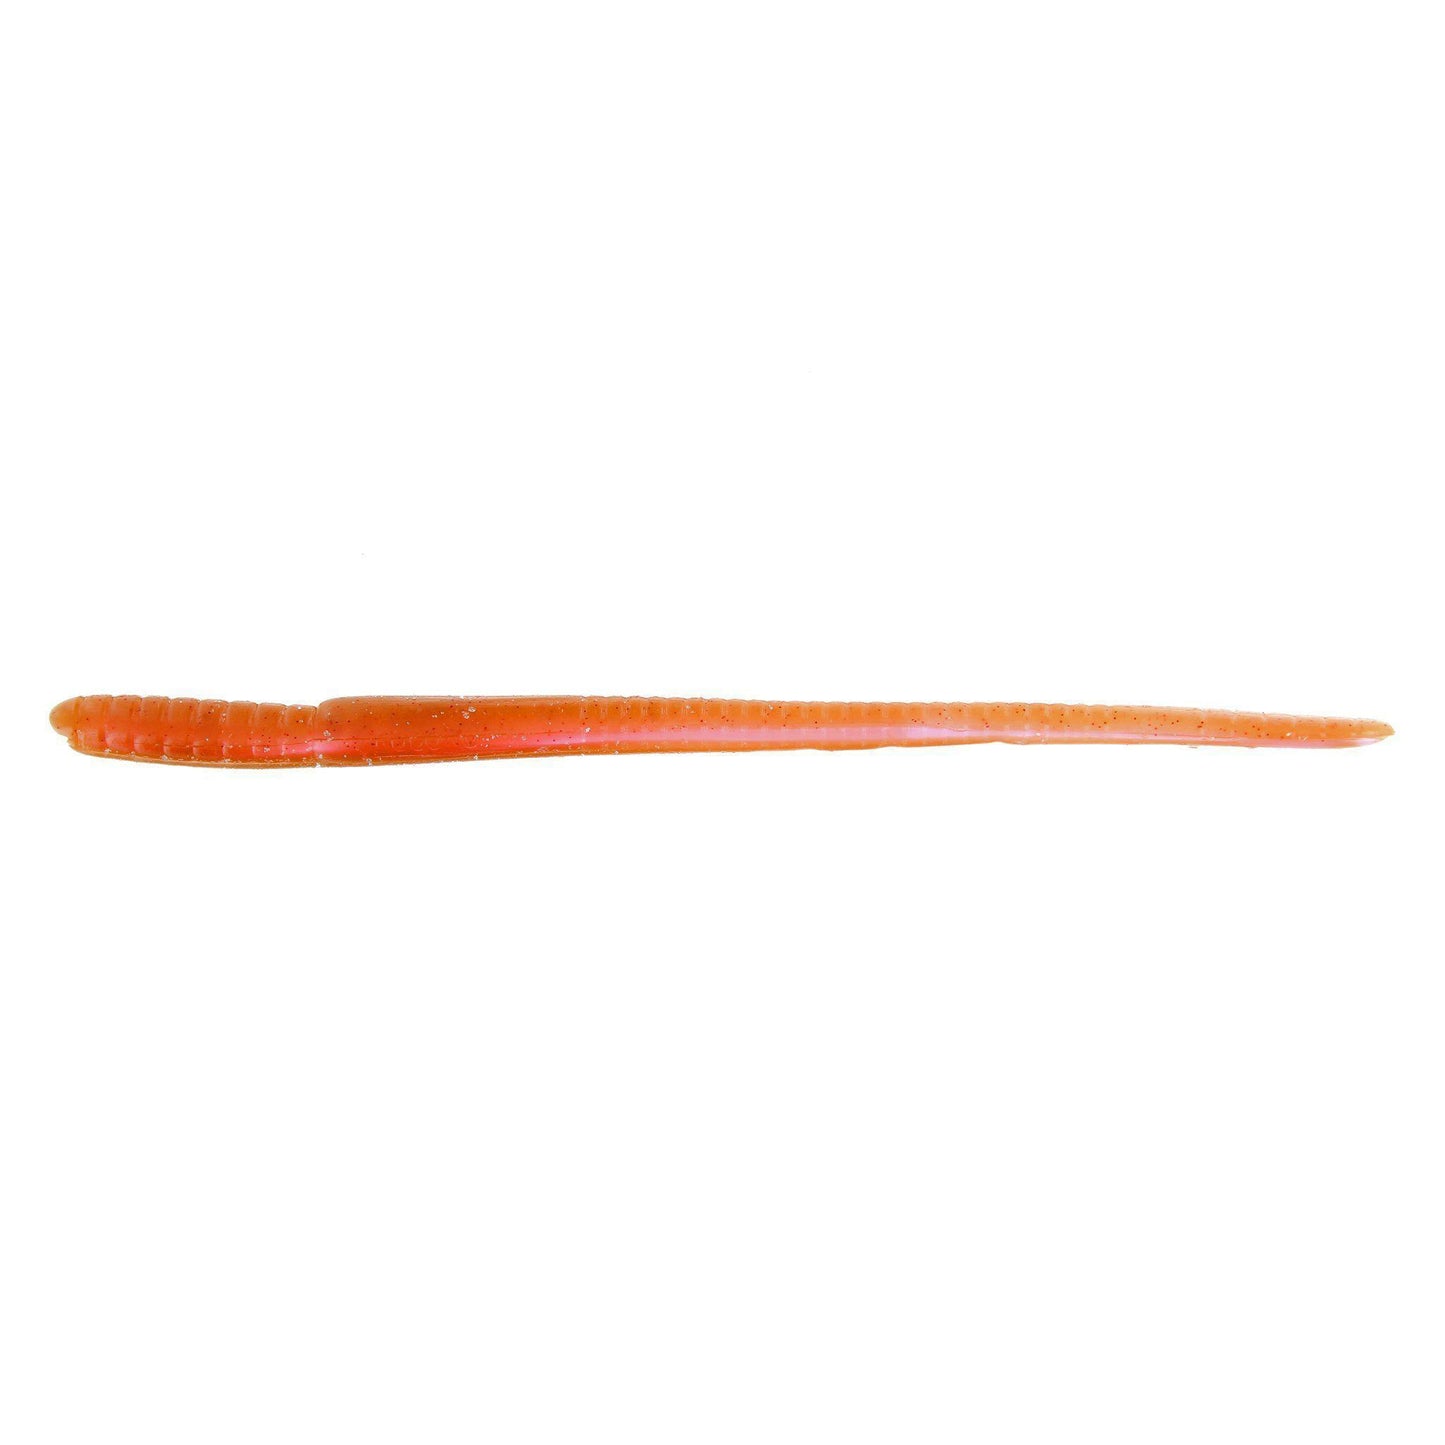 Roboworm Straight Tail 7 Sl-A2Ar Oxblood Light/Red Flake 8Pk